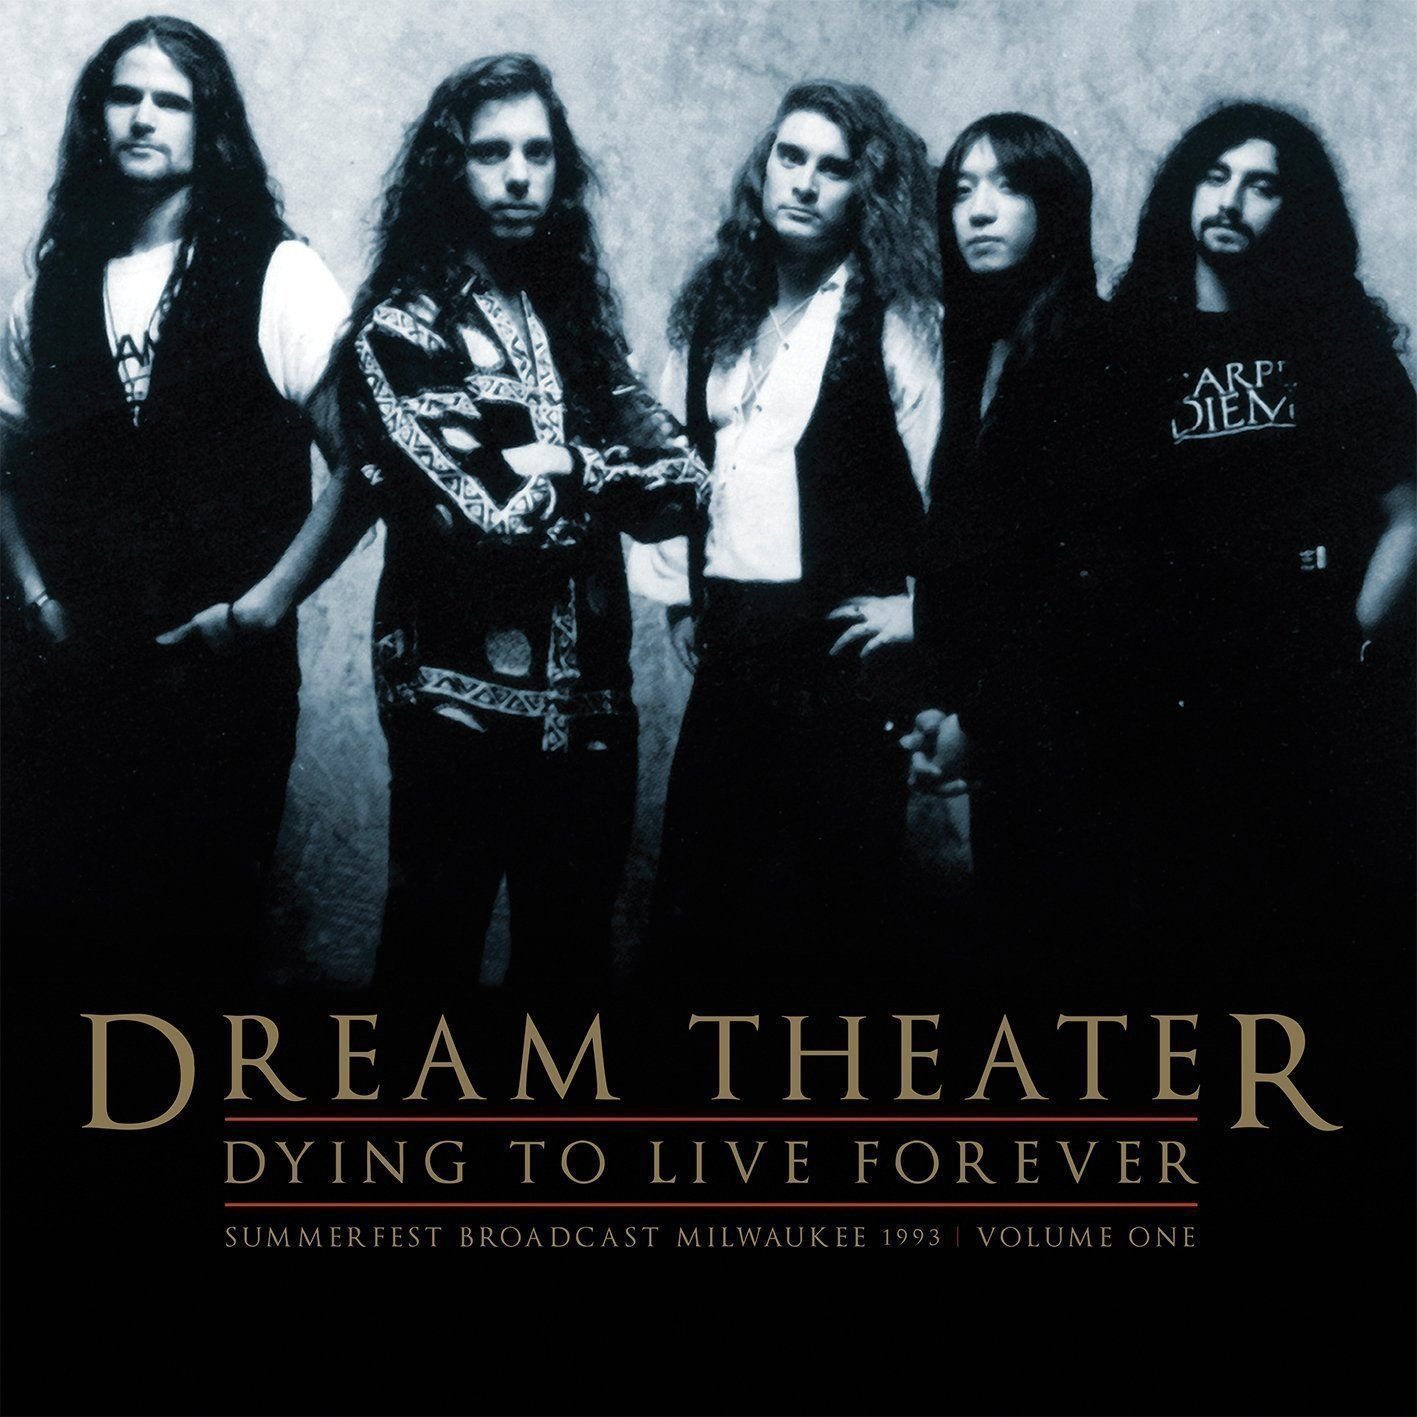 Disco de vinil Dream Theater - Dying To Live Forever - Milwaukee 1993 Vol. 1 (2 LP)